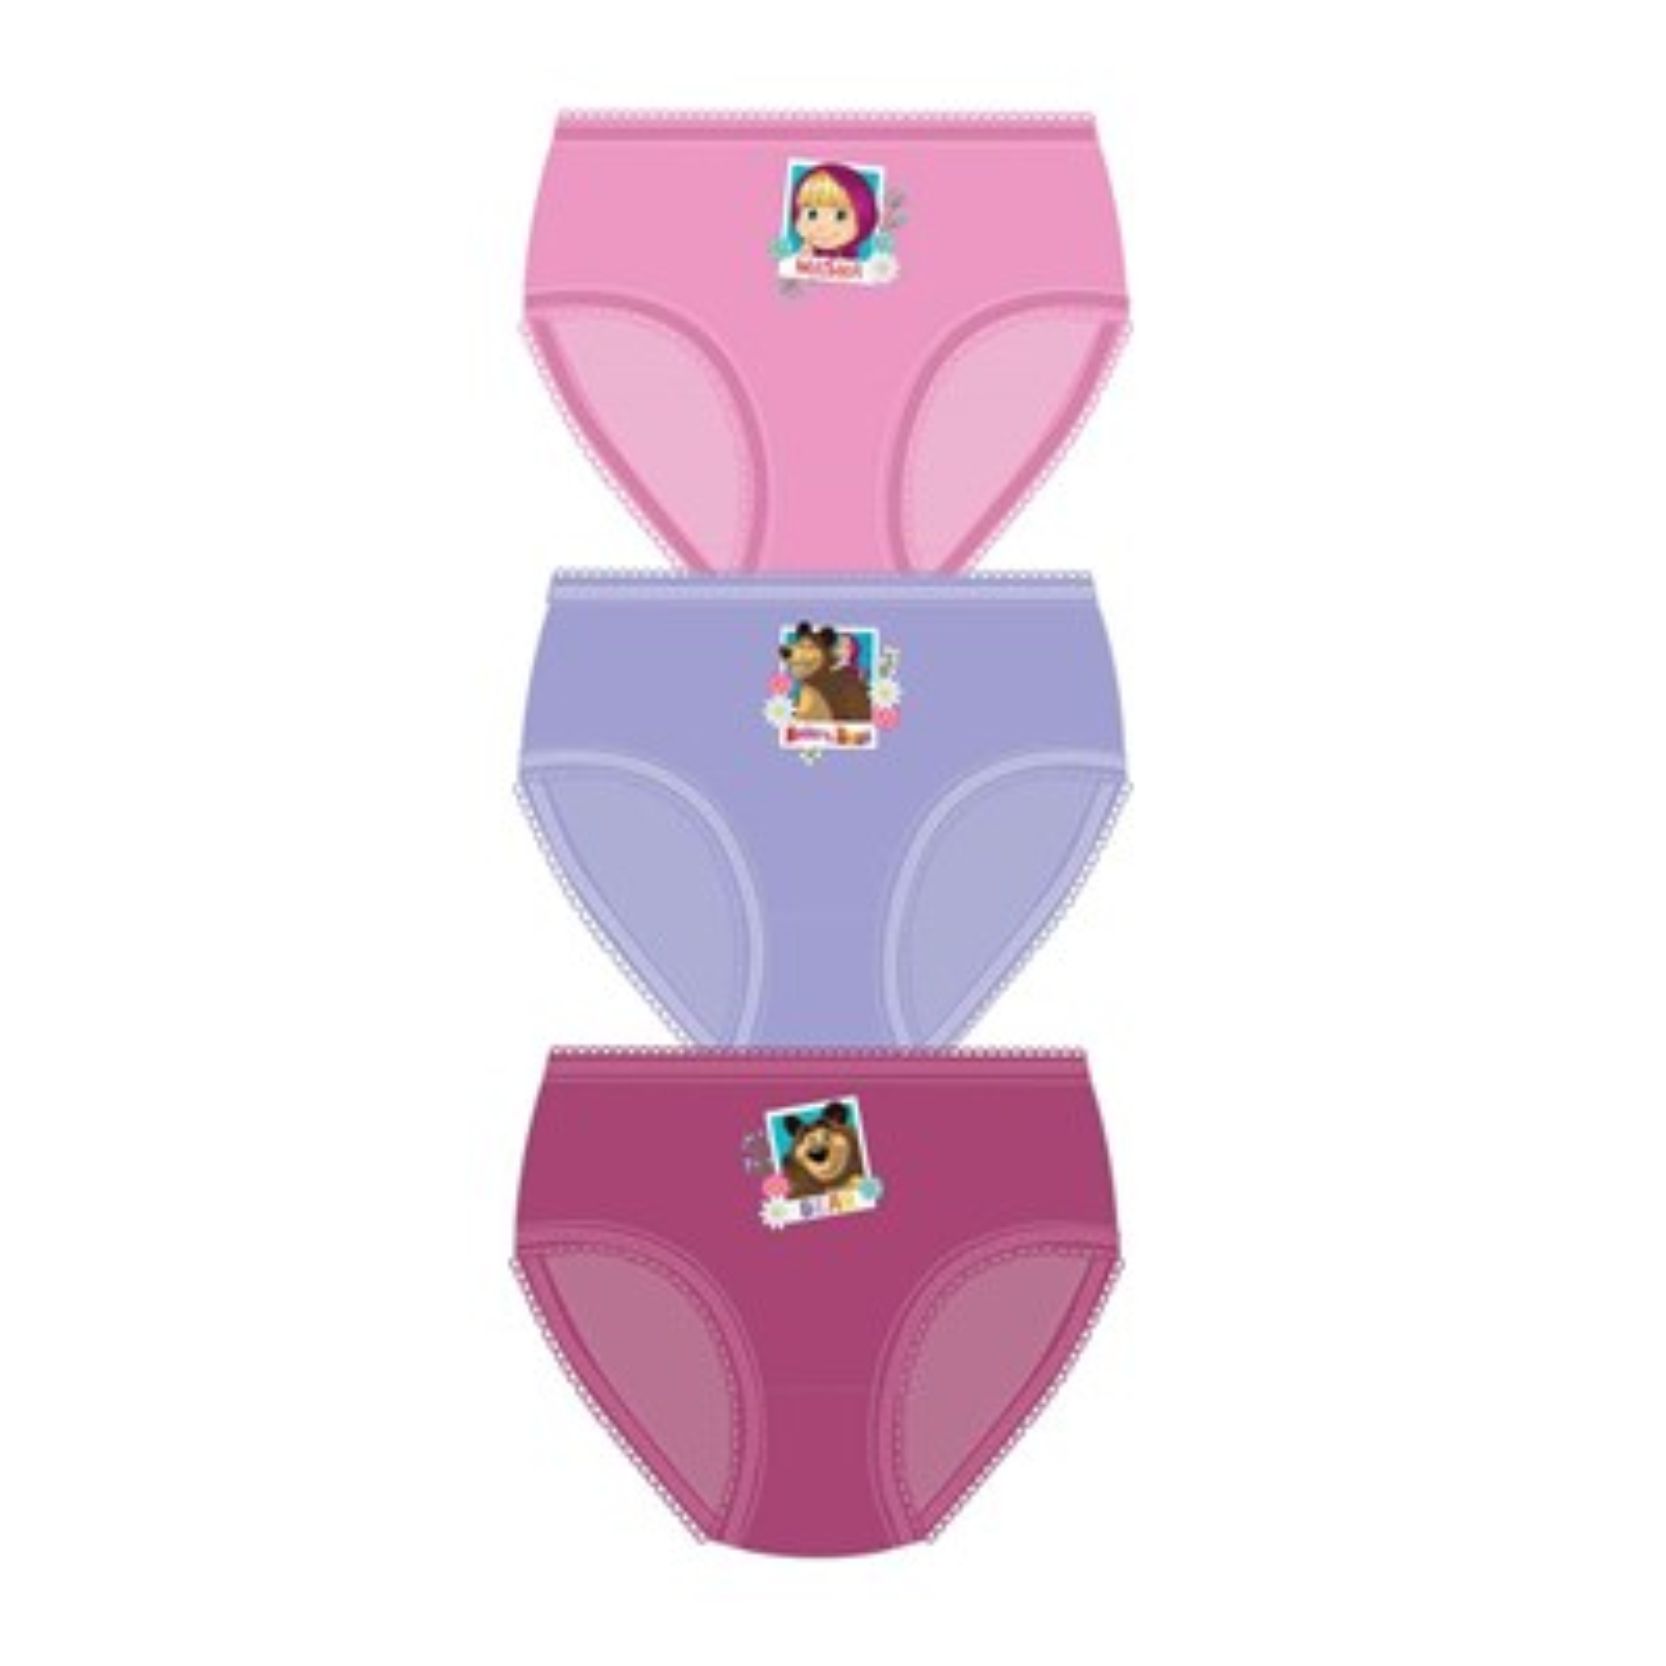 Girls Masha And The Bear 3 Pack Briefs Crested School Wear 